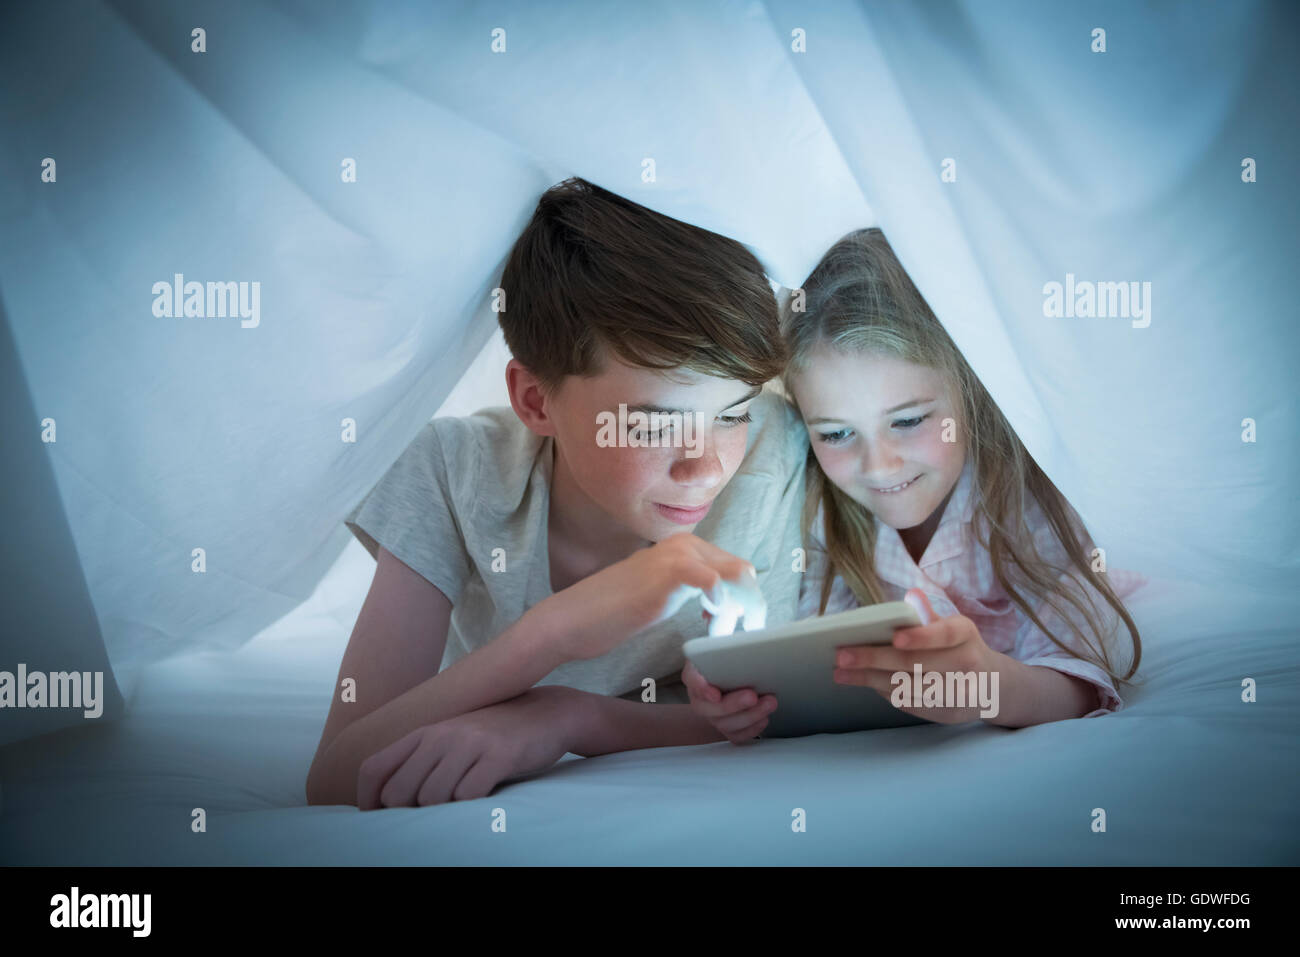 Brother and sister sharing digital tablet under sheet Stock Photo